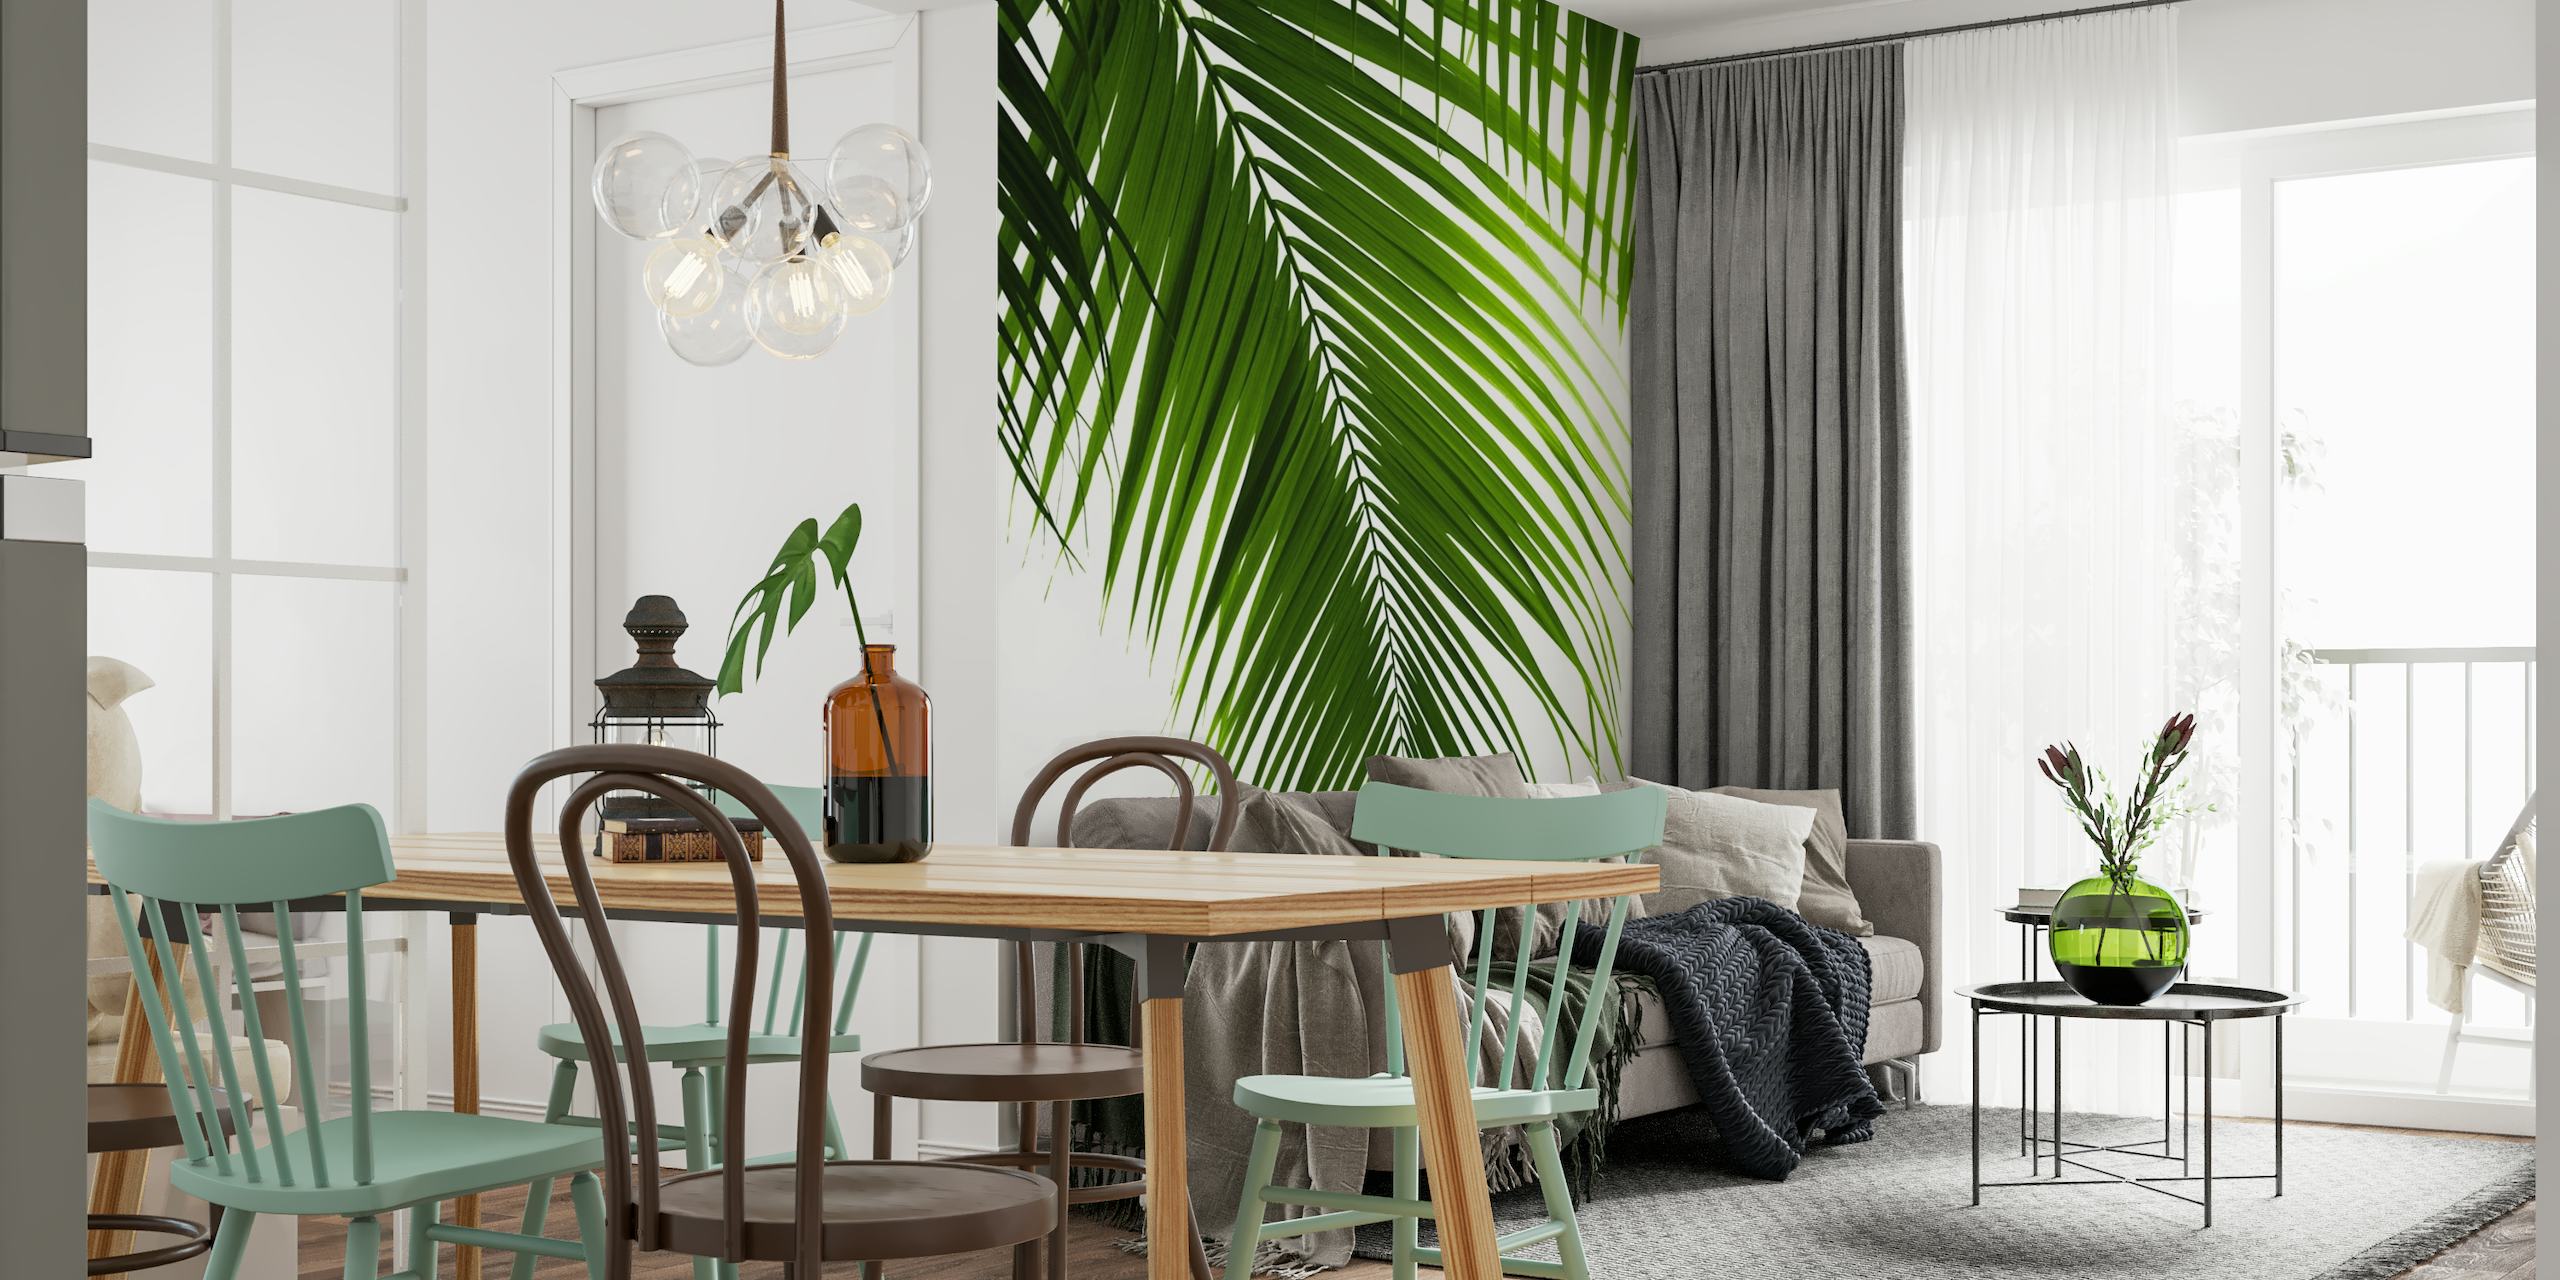 Palm Leaves Green Vibes 10 tapete